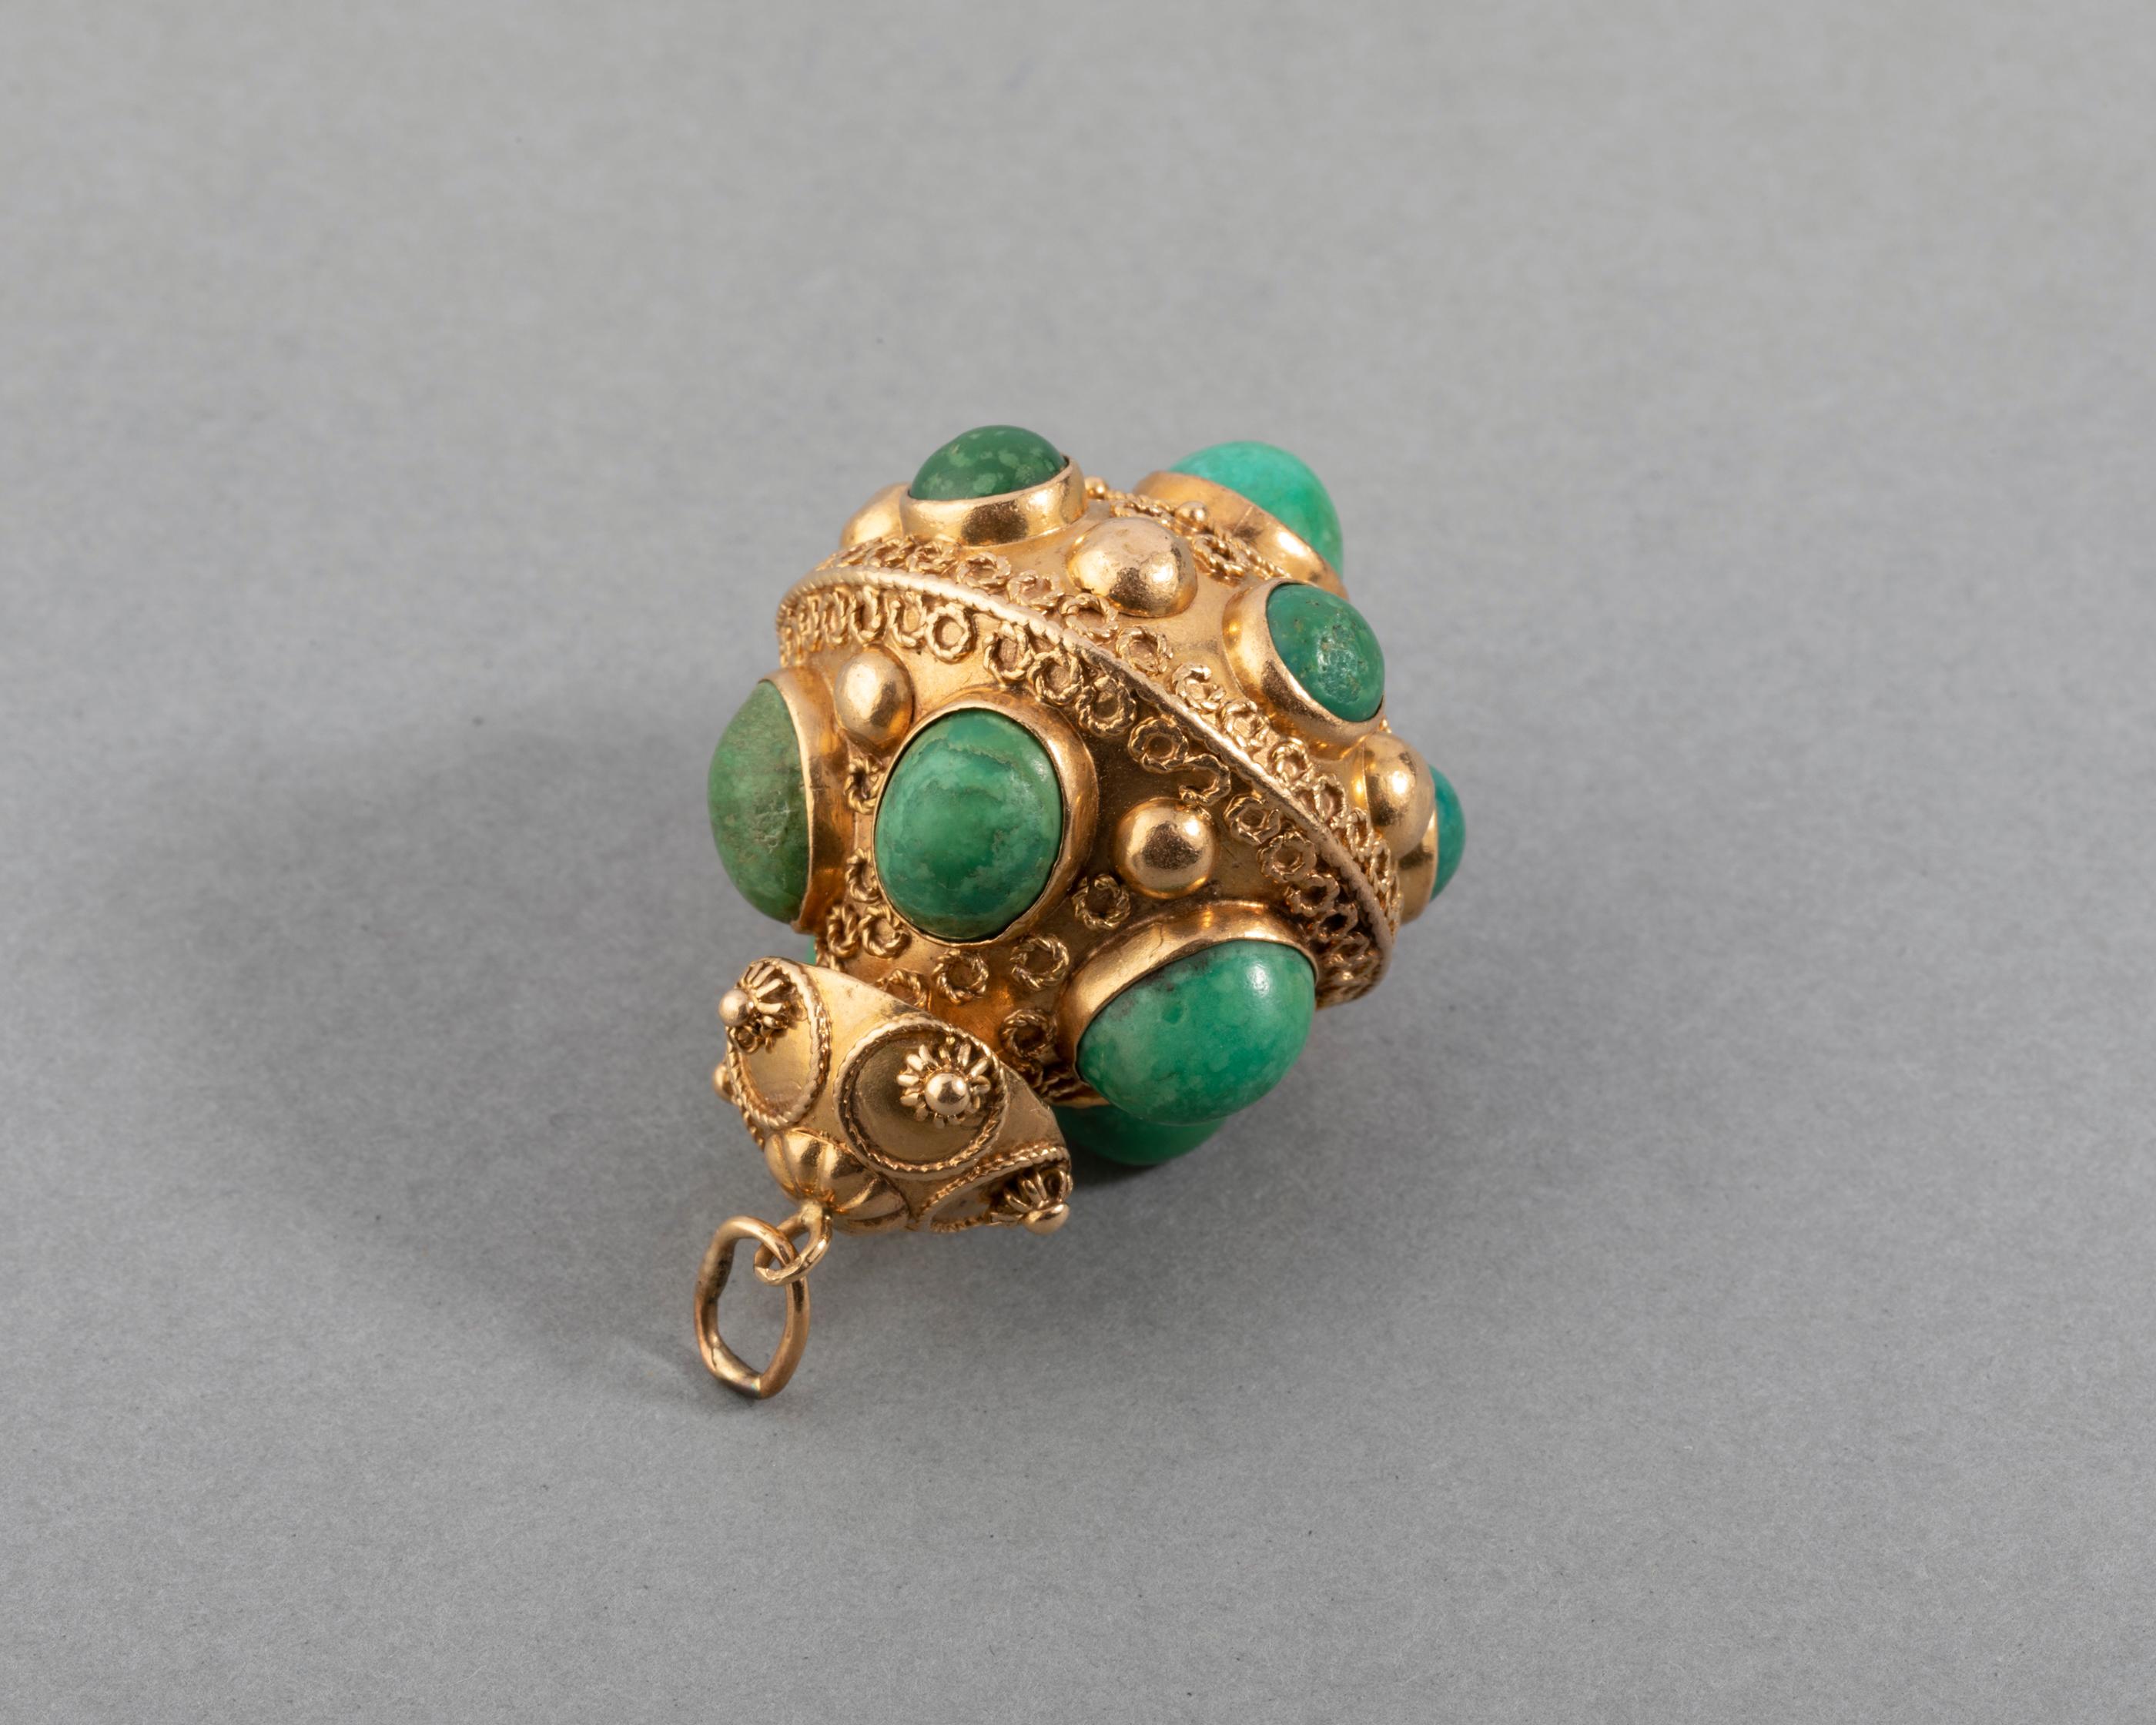 Women's Vintage Gold and Turquoises Charm